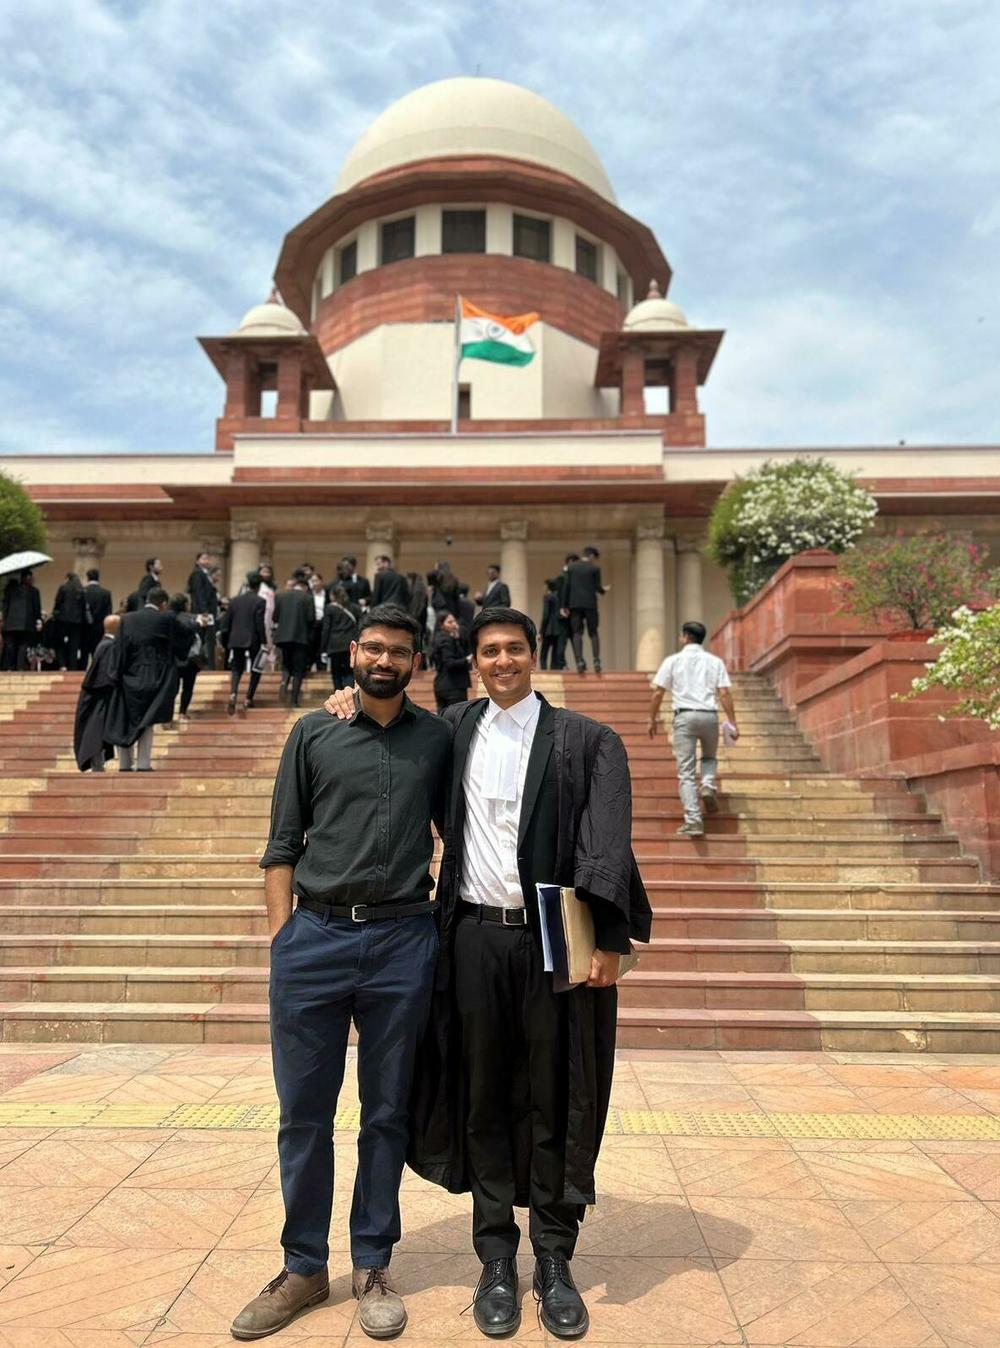 Utkarsh Saxena (right), is not only a petitioner but also a lawyer arguing the case. Being able to marry his partner, Ananya Kotia (left), would entitle them to a host of rights currently reserved for heterosexual married couples.